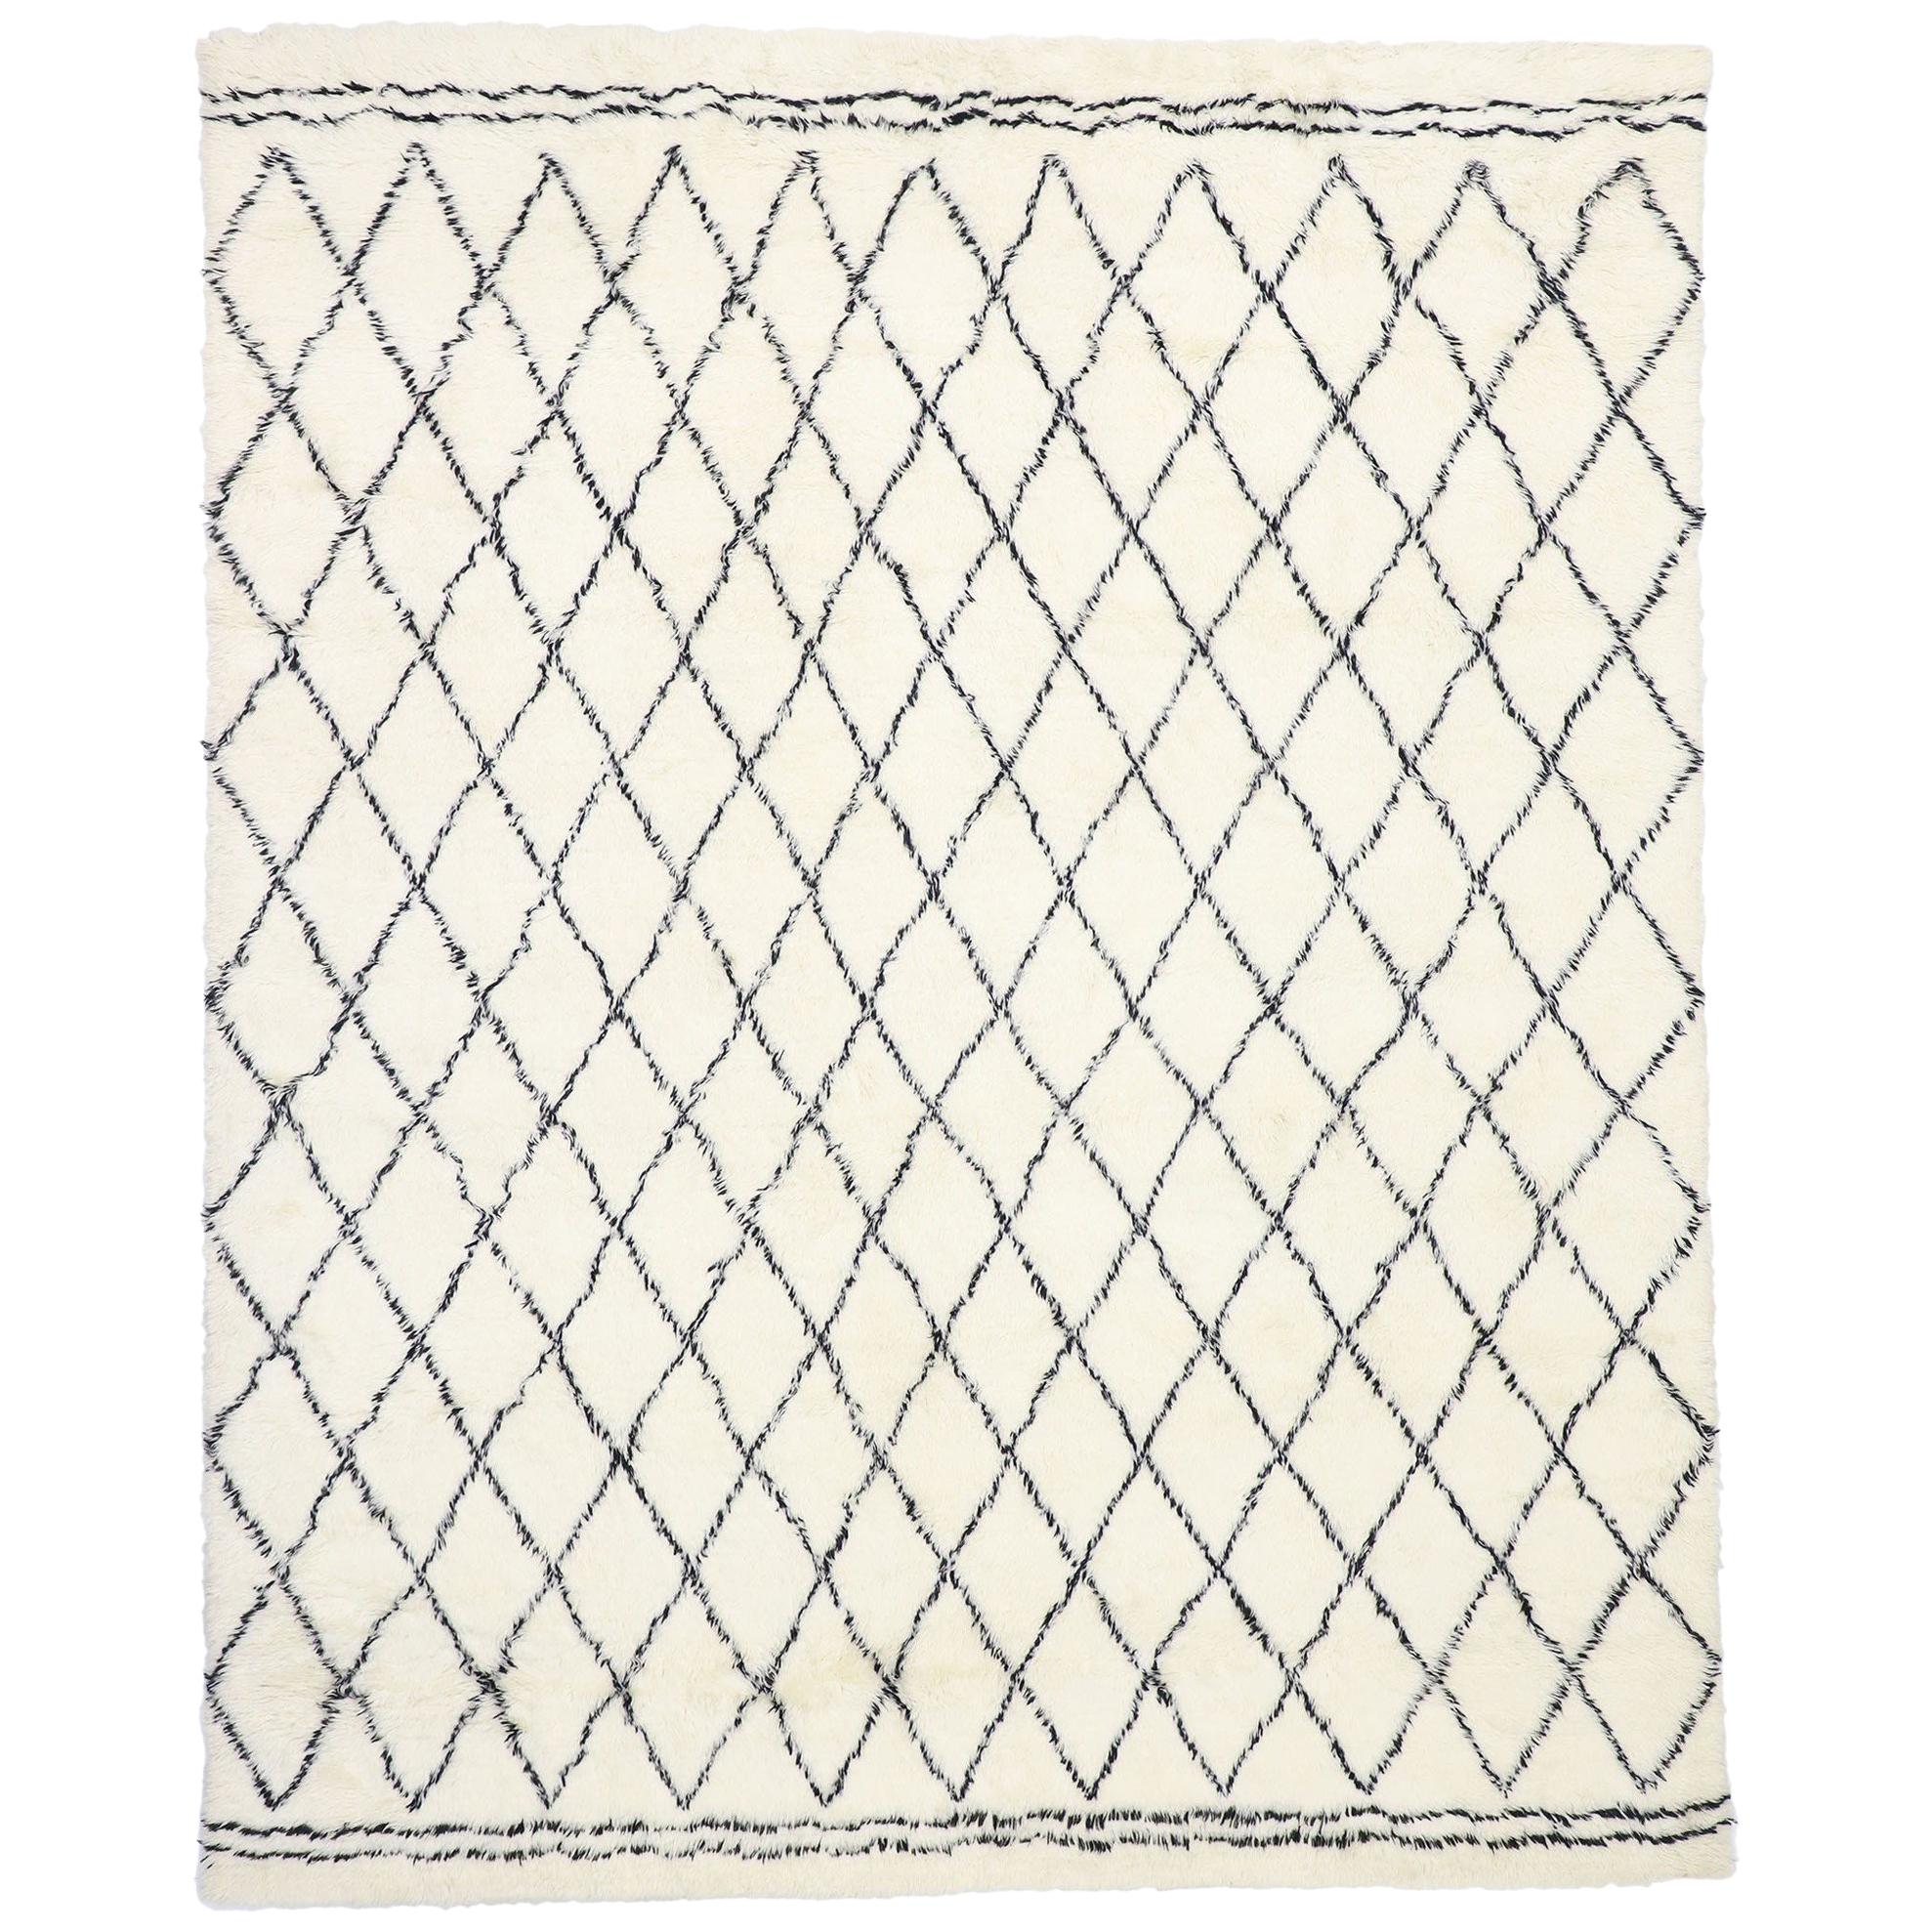 New Contemporary Moroccan Style Rug with Cozy, Hygge Vibes 